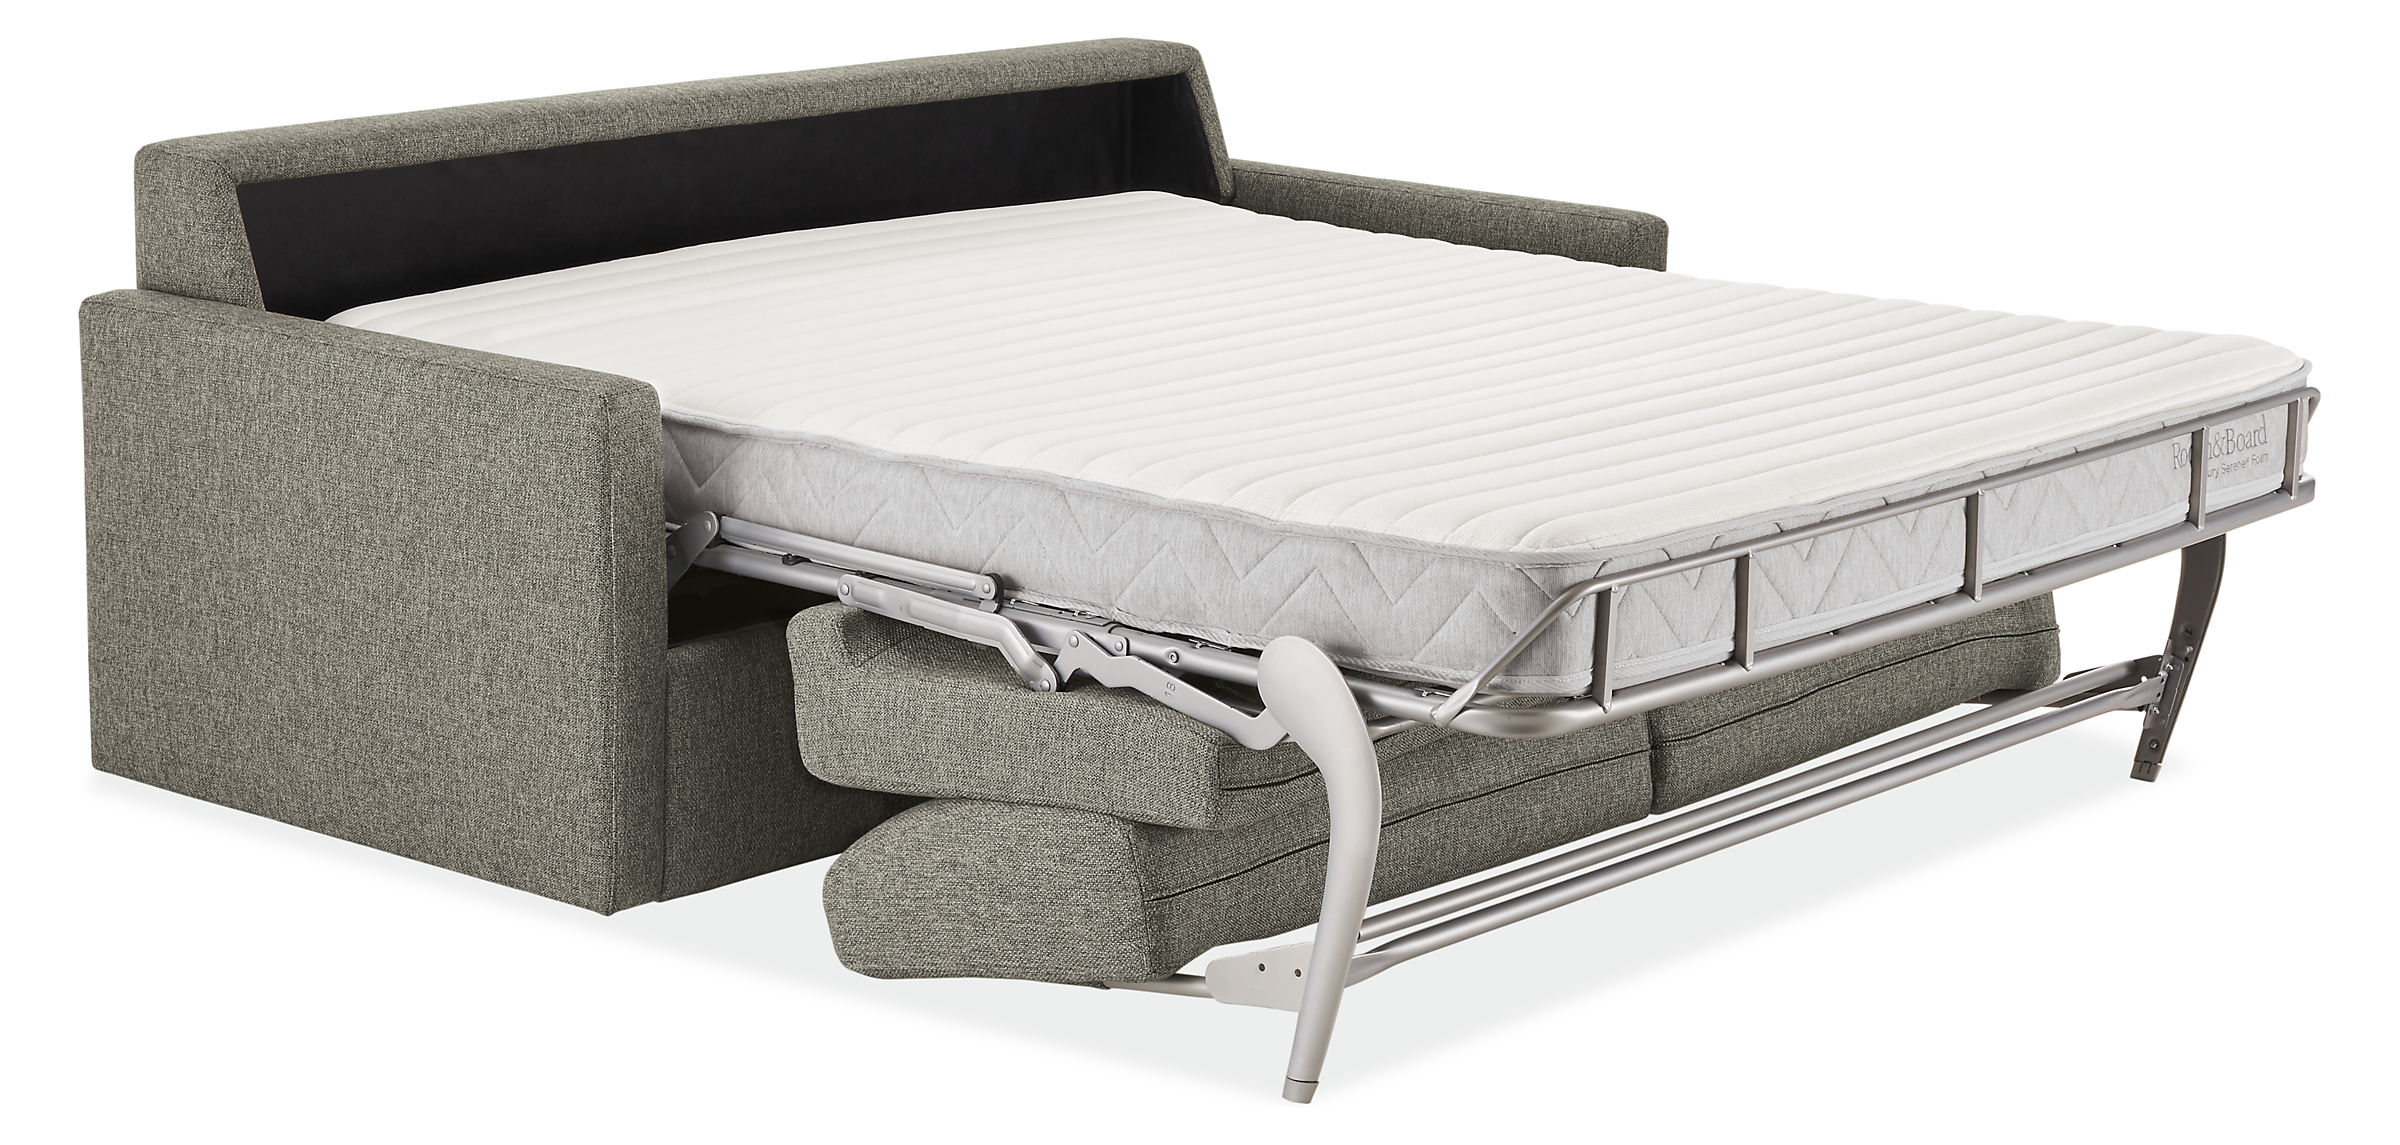 Detail of Franklin foldout sleeper sofa in open position with mattress, in Tepic Grey fabric.